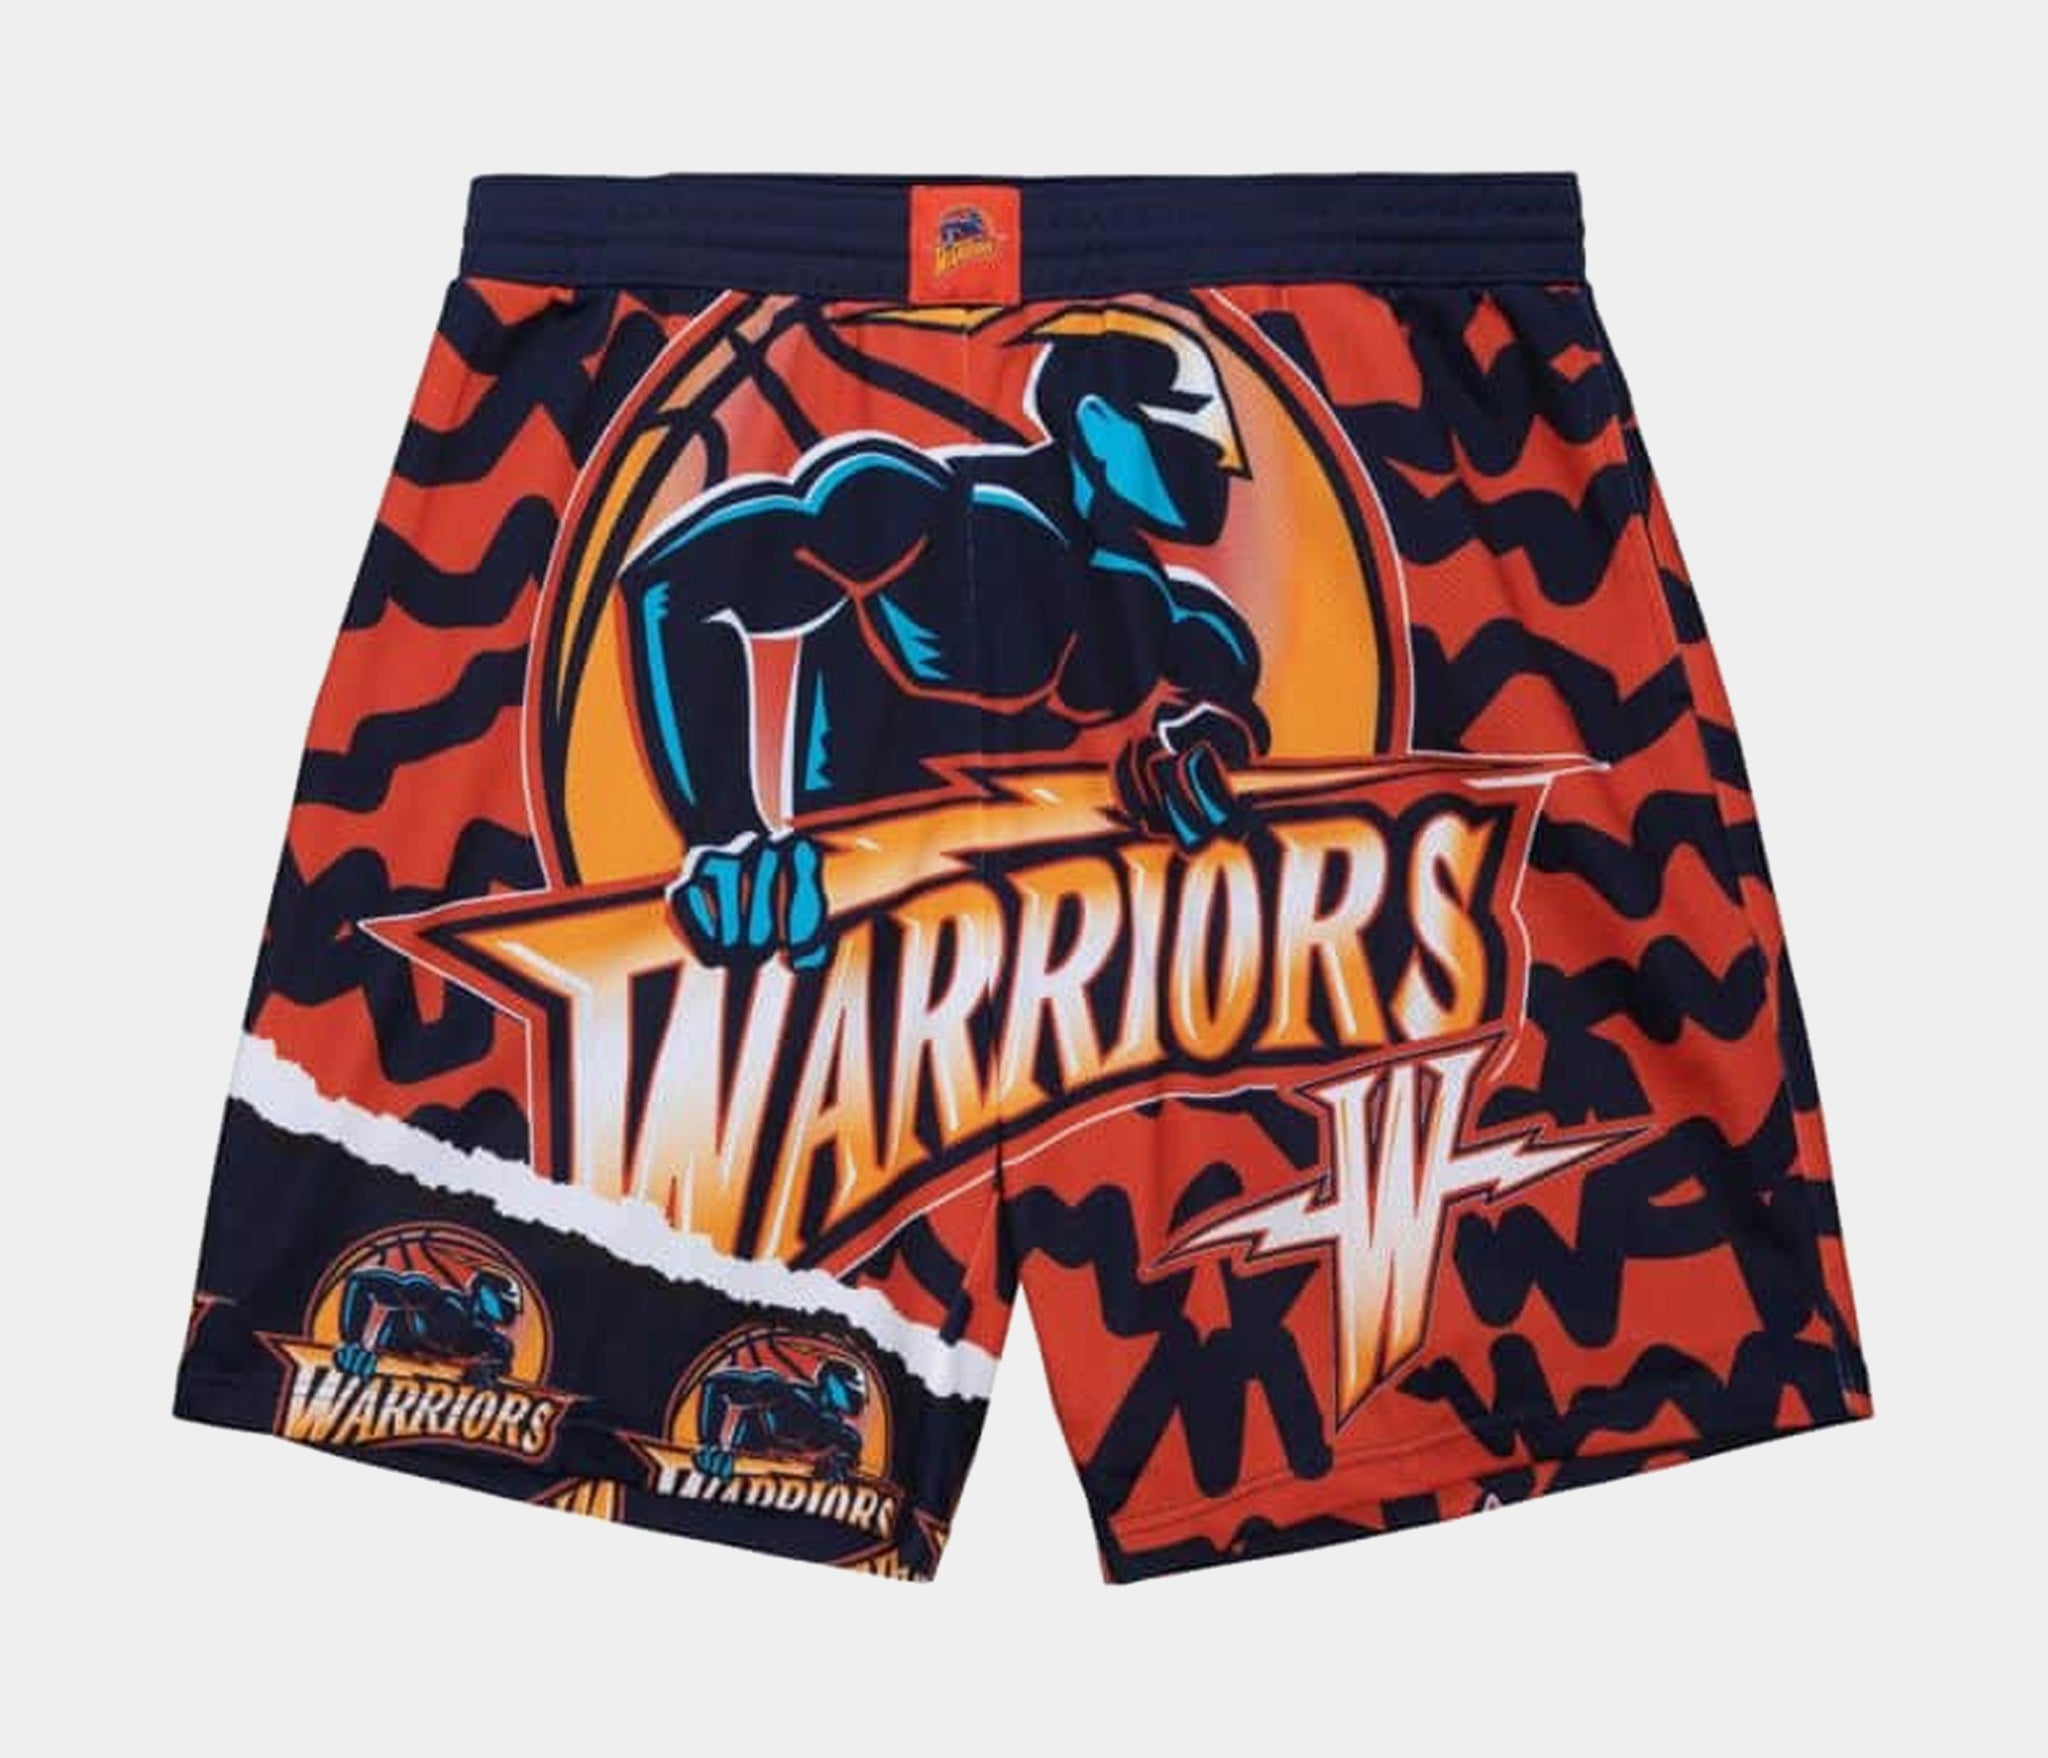 Mitchell & Ness Golden State Warriors Big Face 2.0 Shorts Large